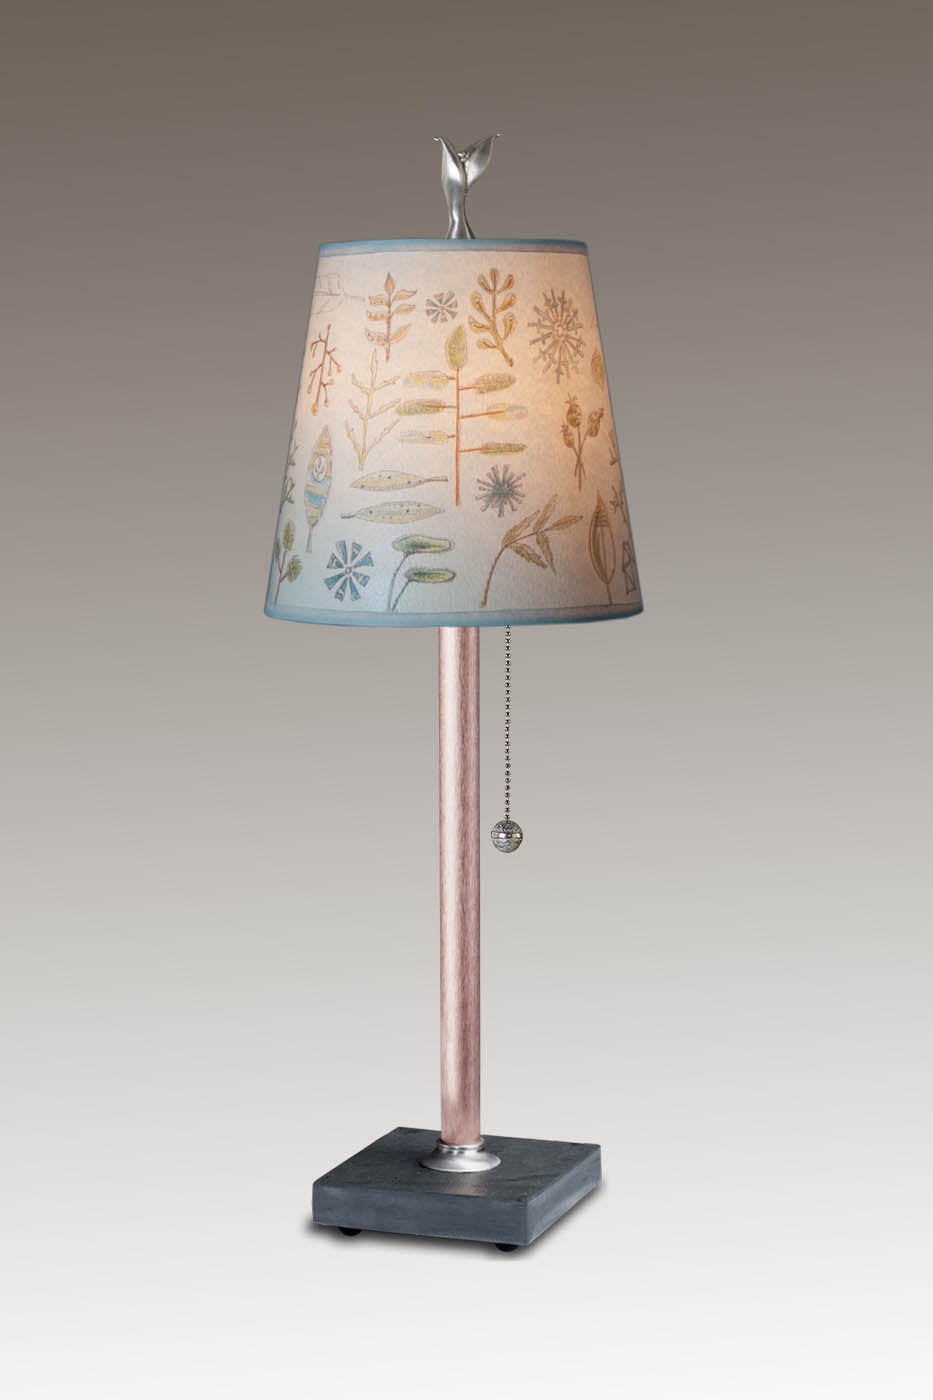 Janna Ugone & Co Table Lamp Copper Table Lamp with Small Drum Shade in Field Chart